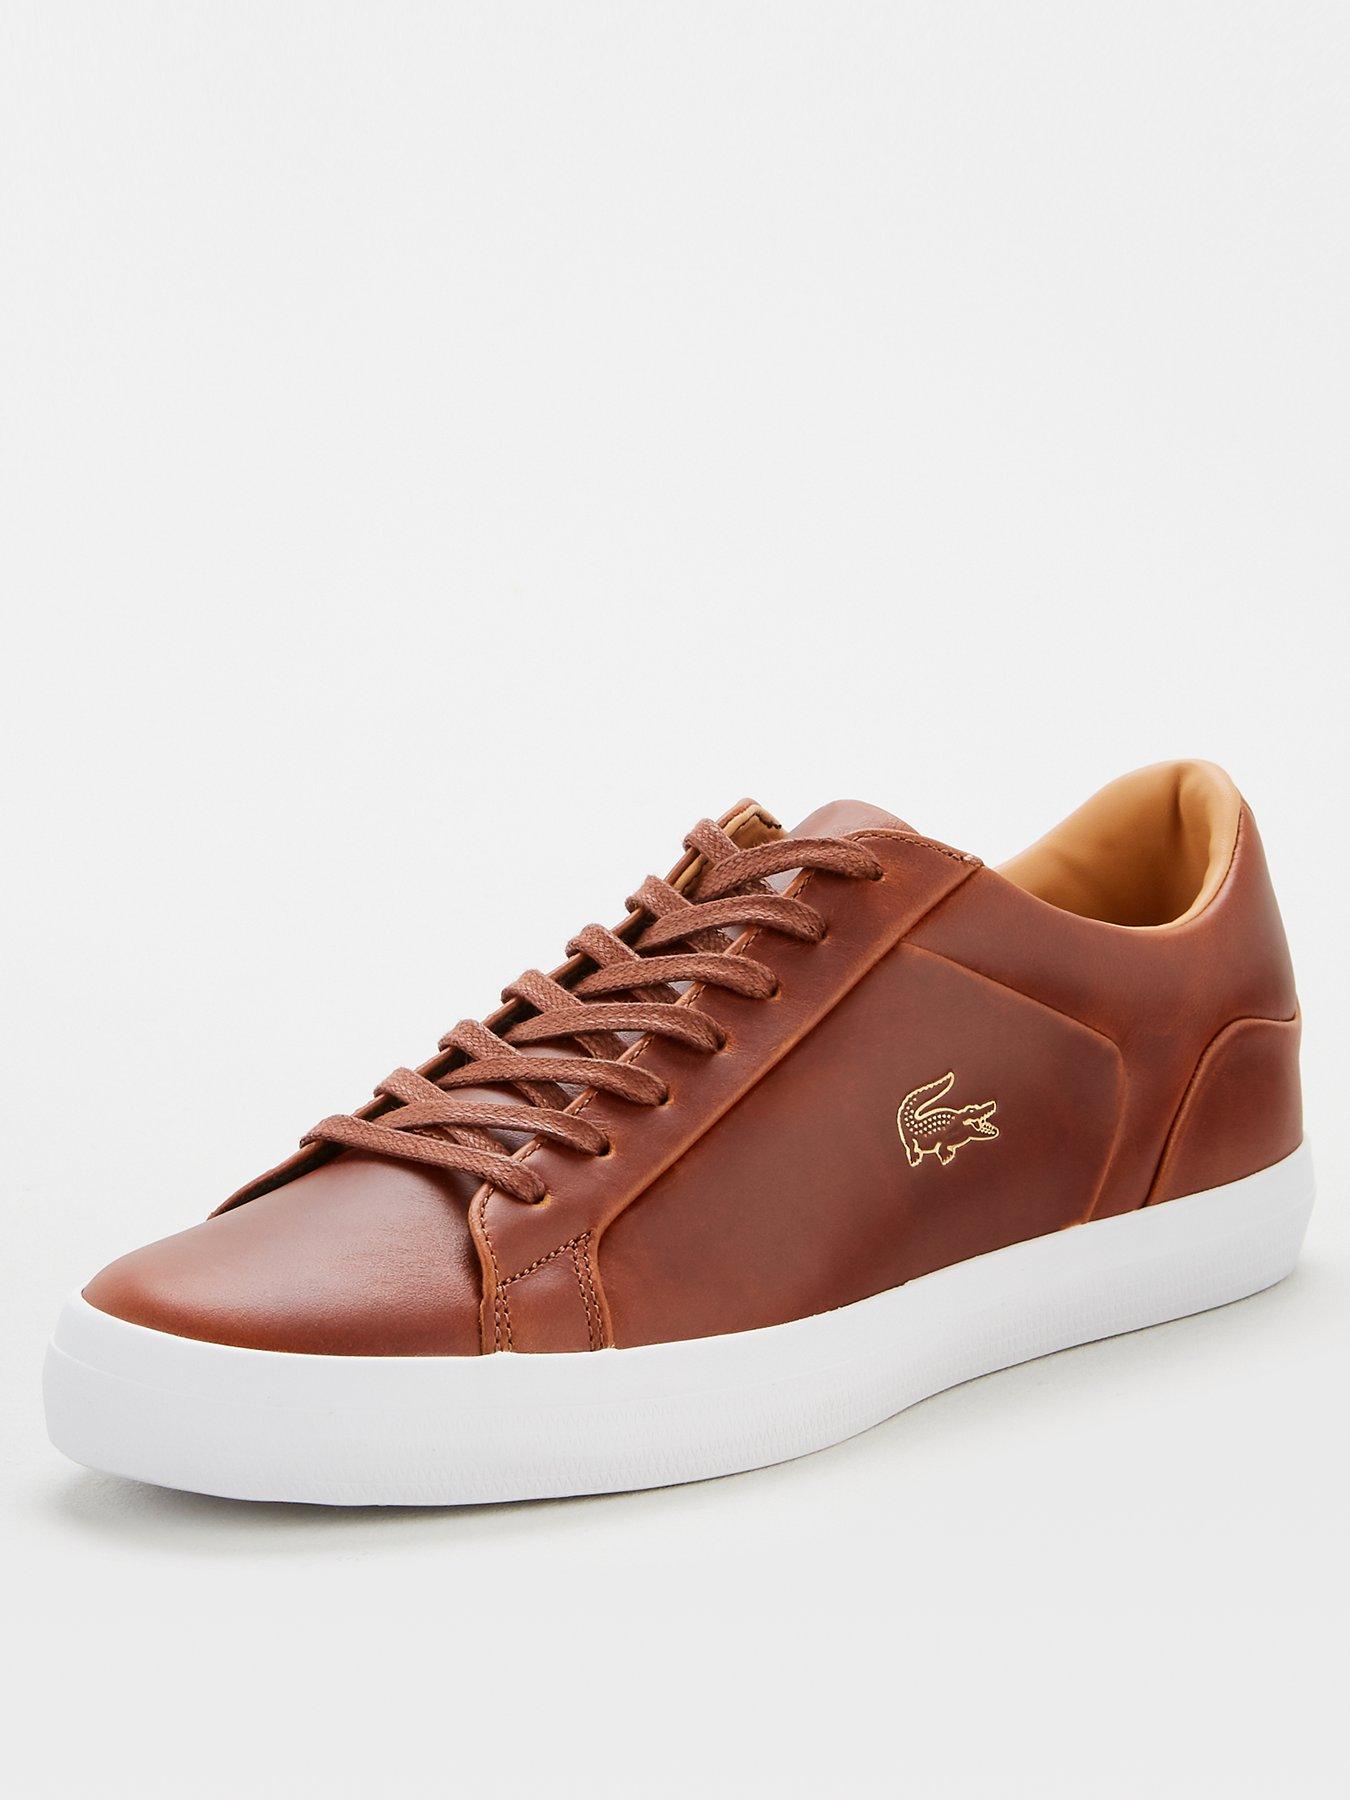 lacoste lerond brown